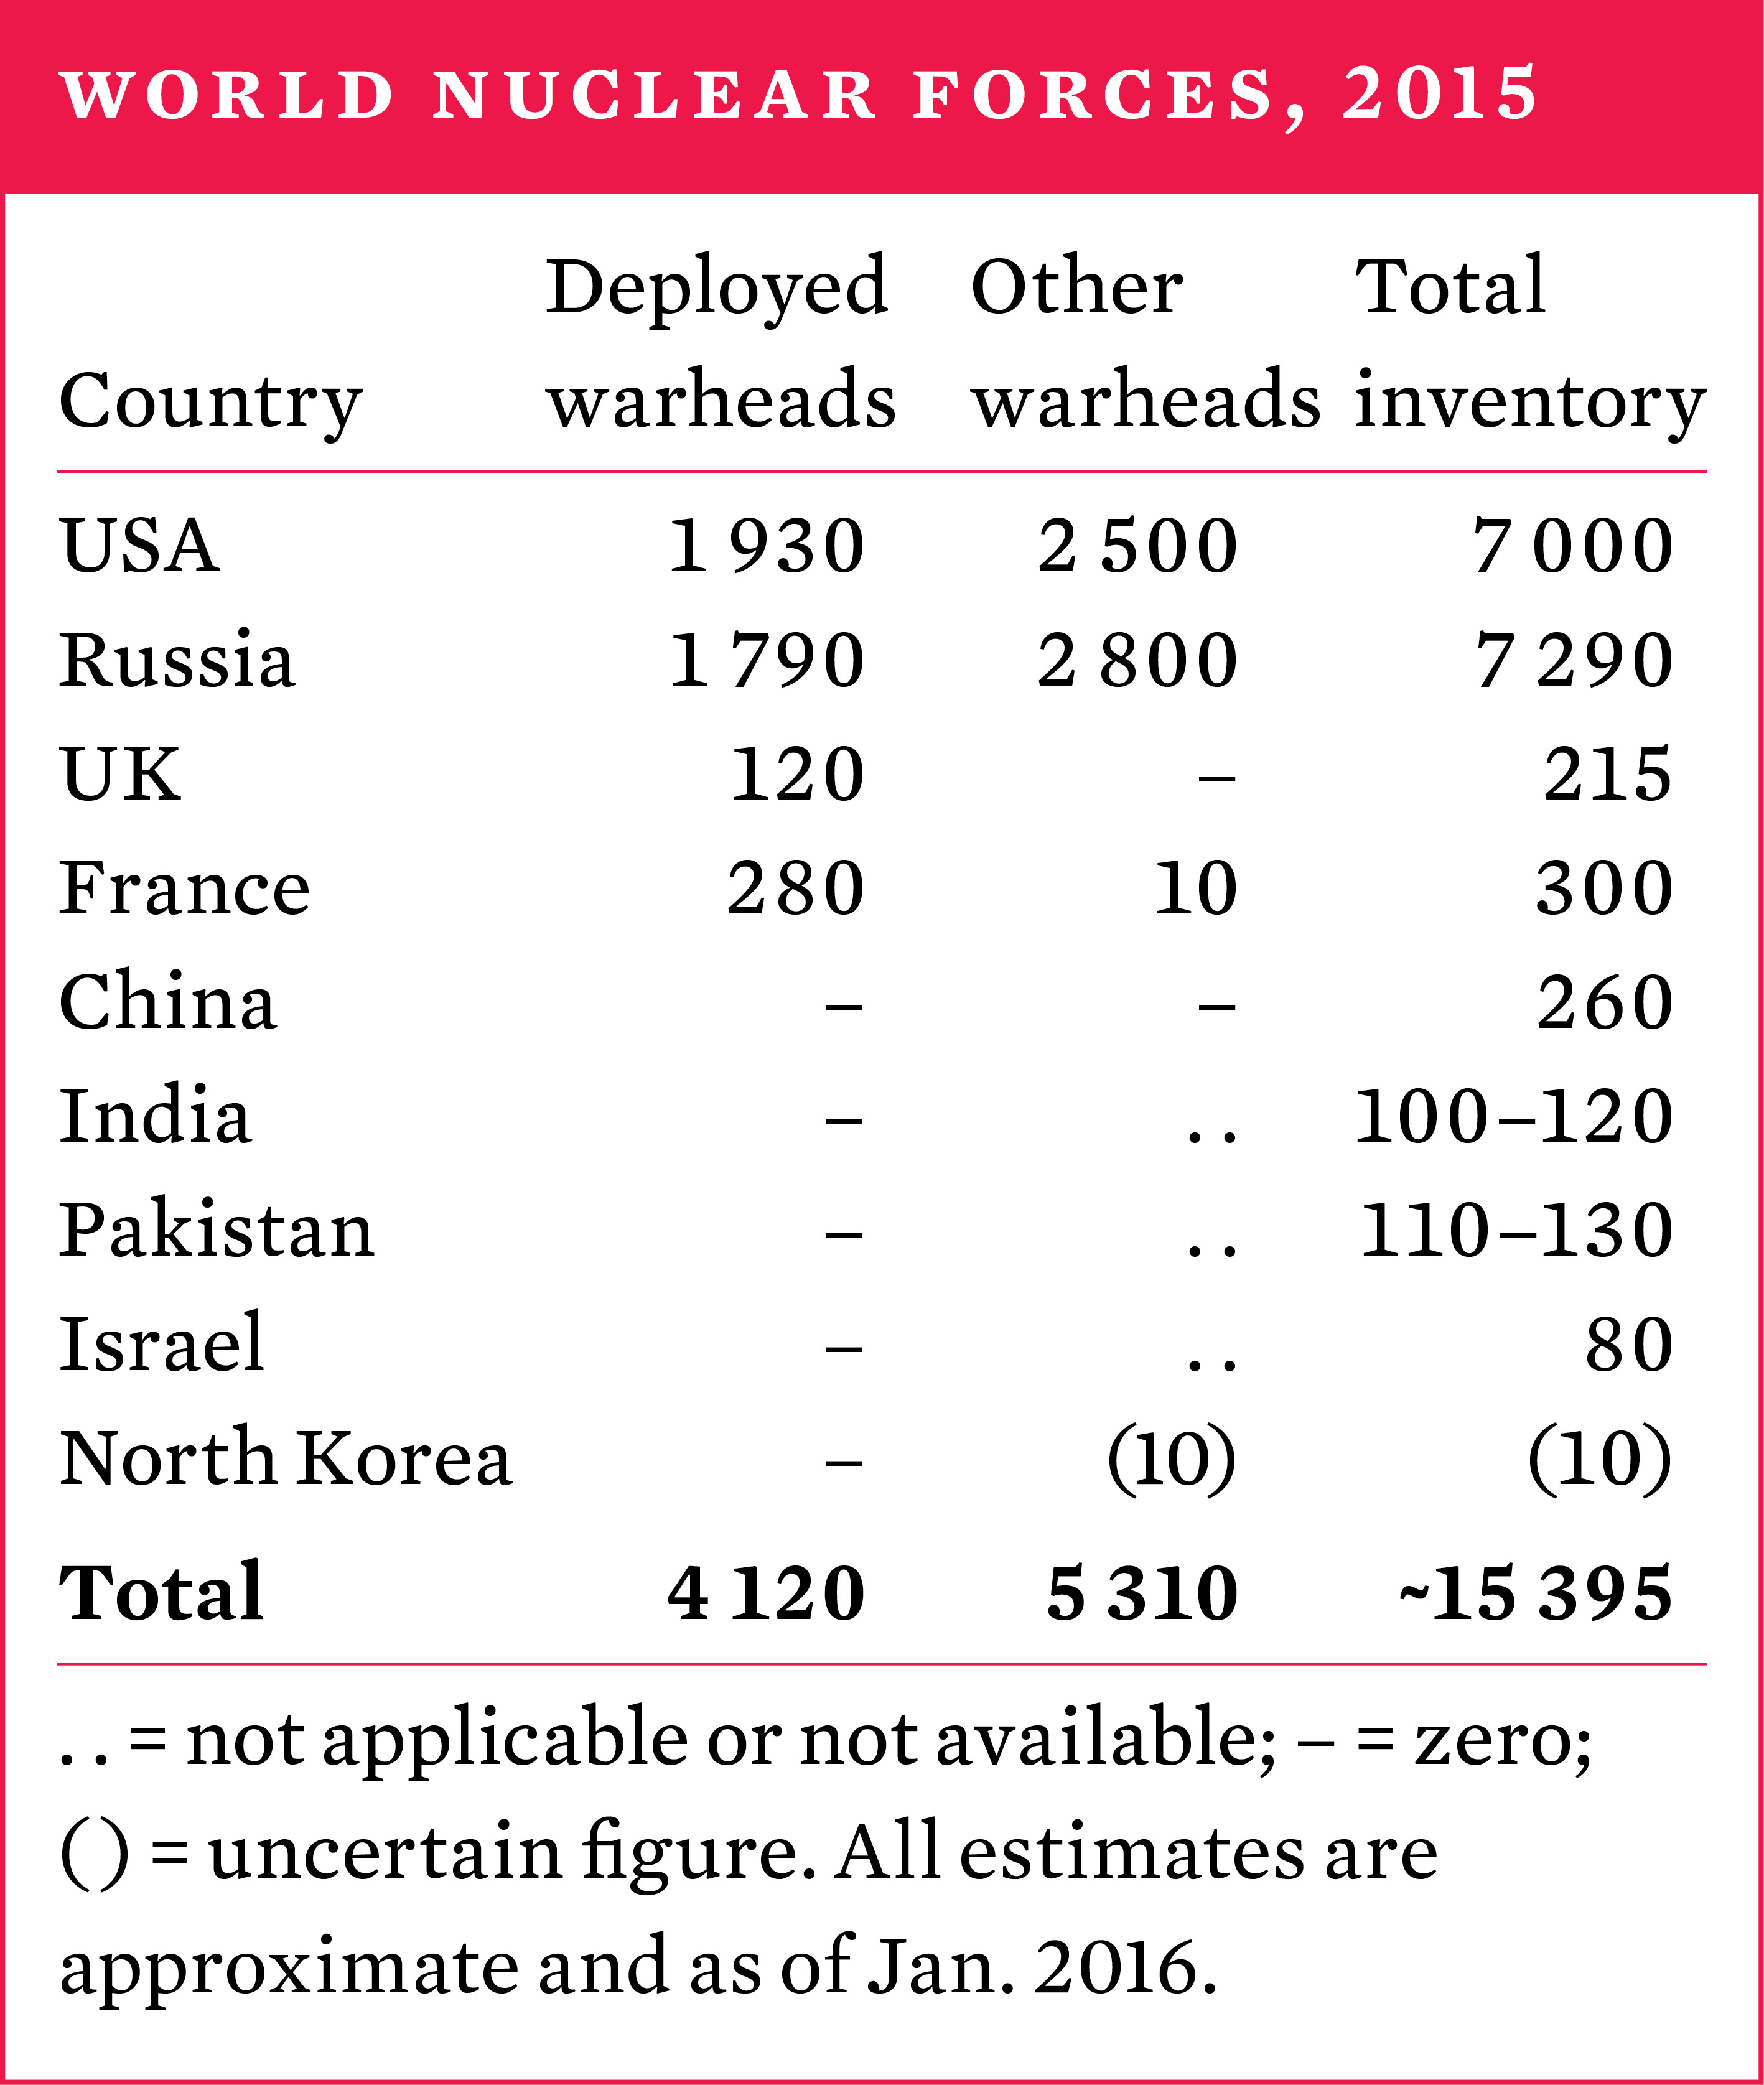 World nuclear forces, 2015